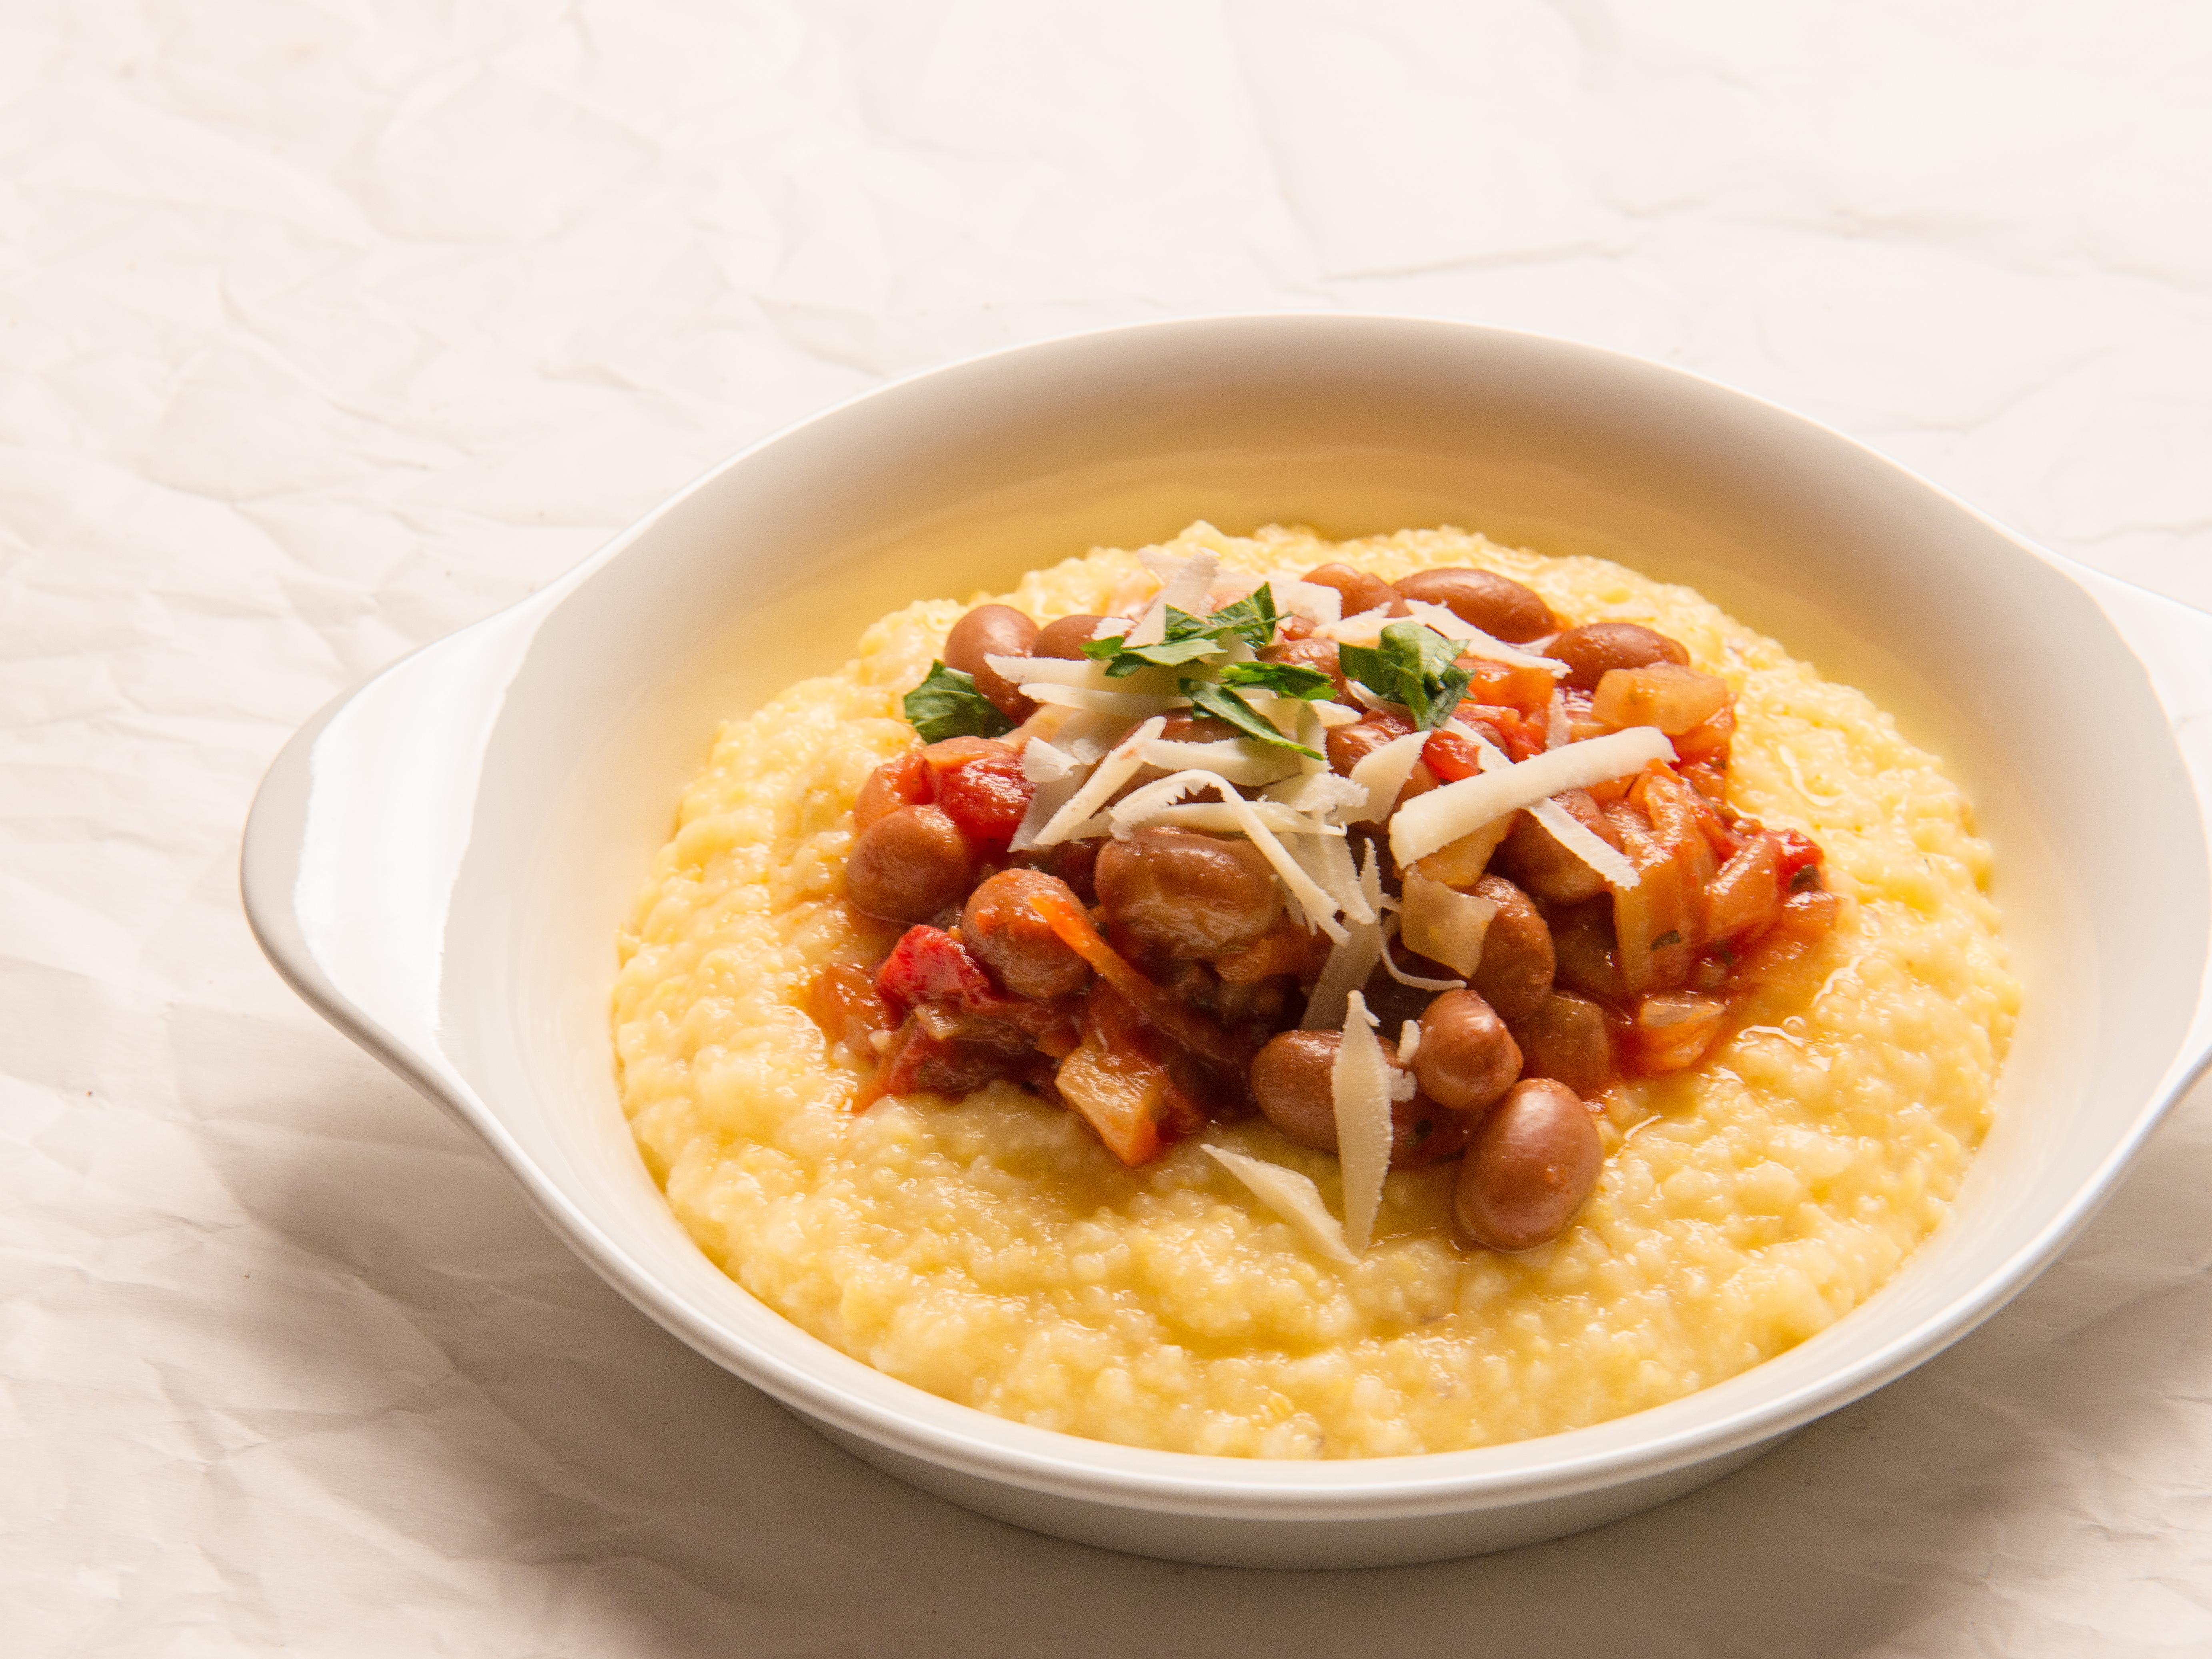 Cranberry Beans with Polenta